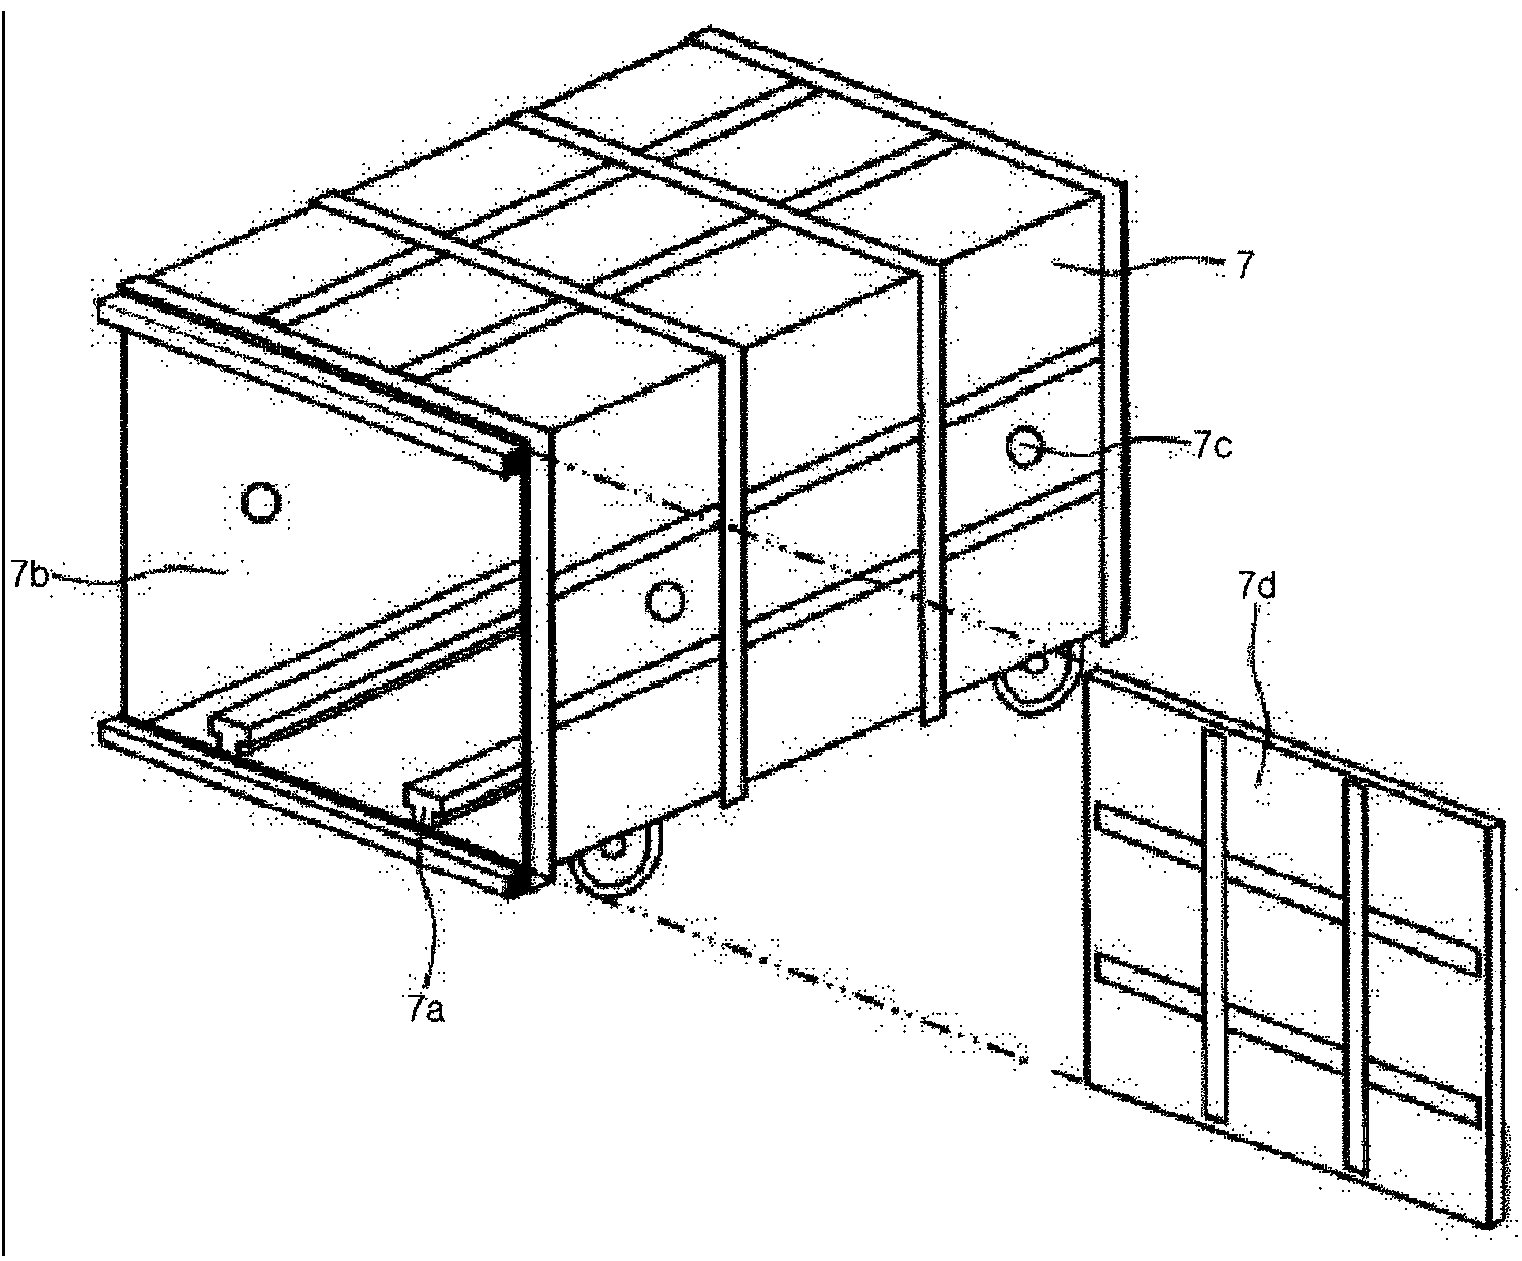 Apparatus and method for manufacturing traditional carbonized tiles